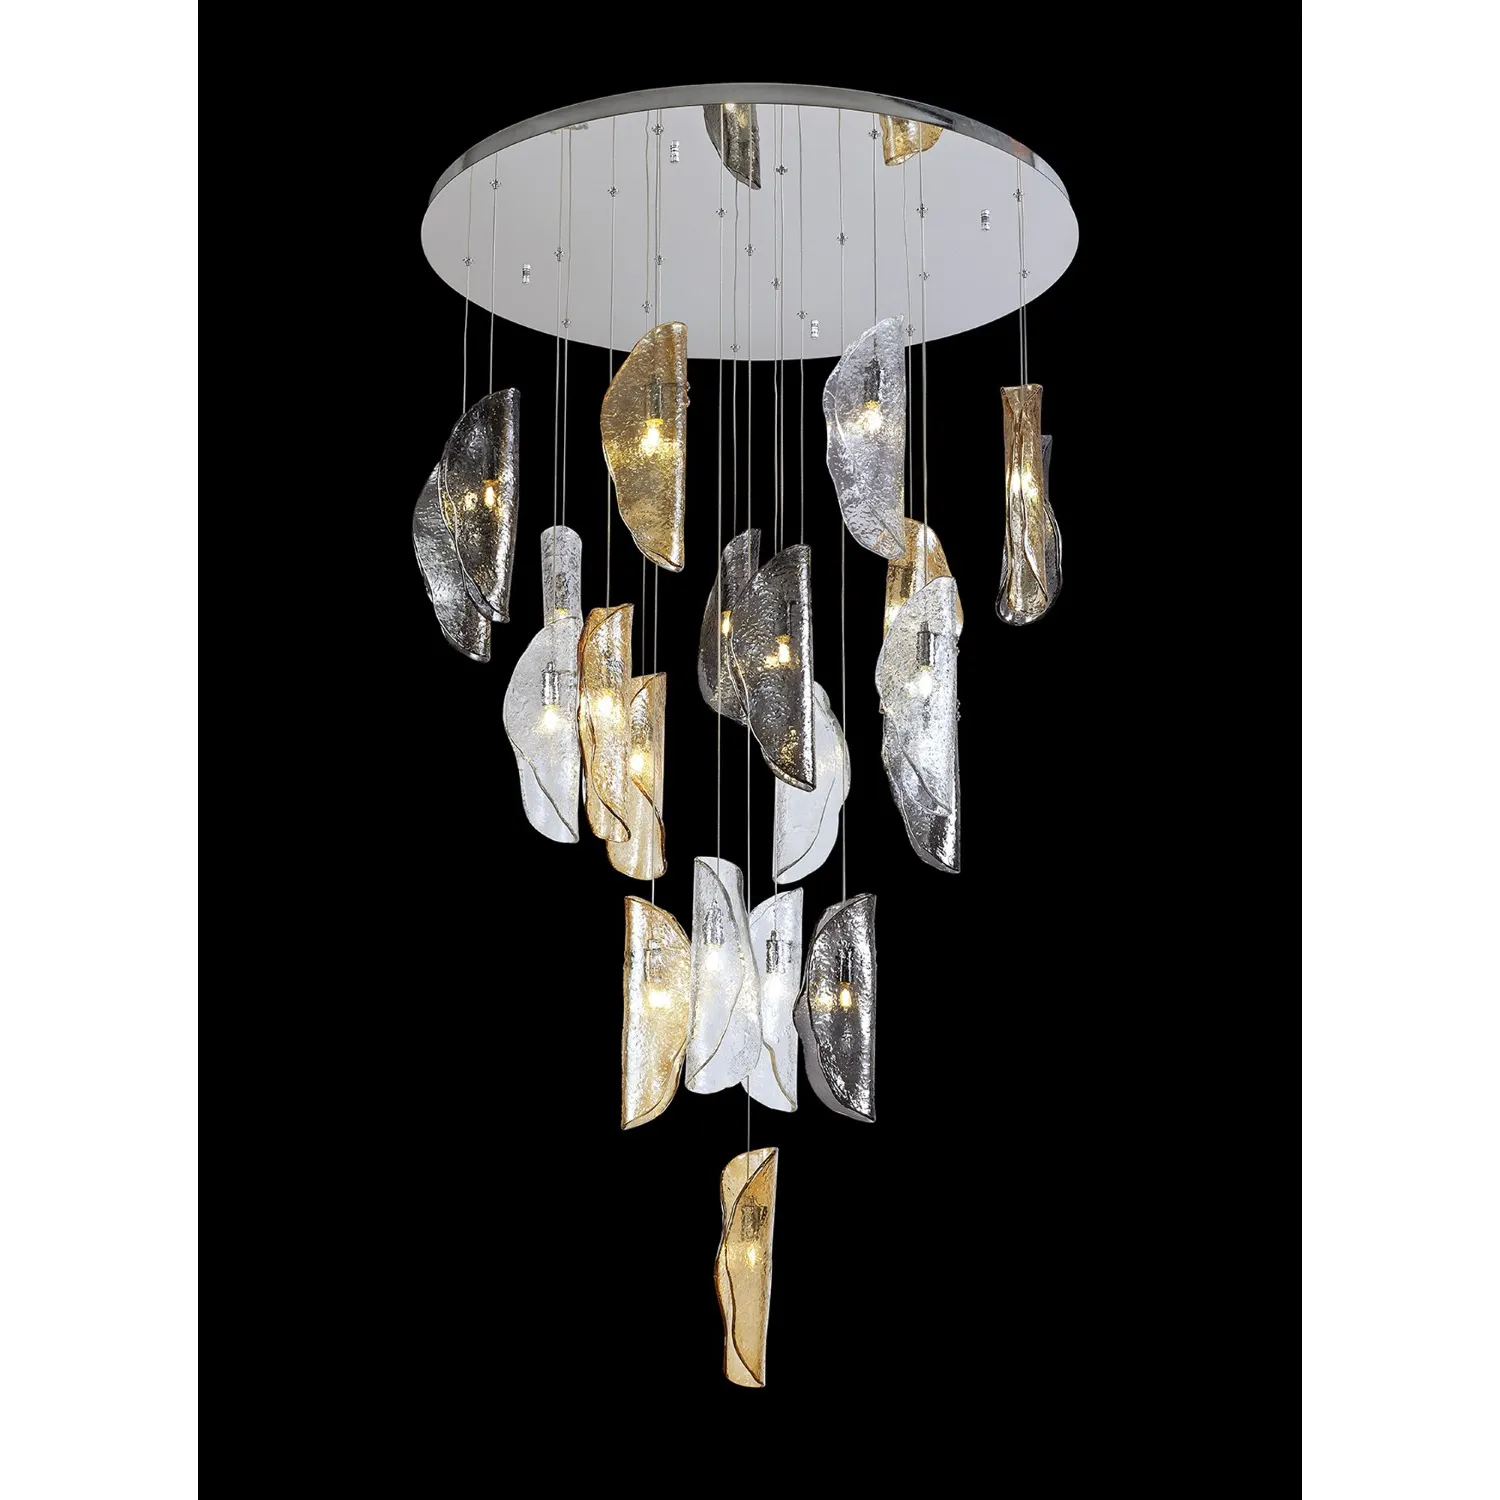 Loughton Pendant 5m, 21 x G9, Polished Chrome Clear And Amber And Smoked Glass Item Weight: 28.1kg